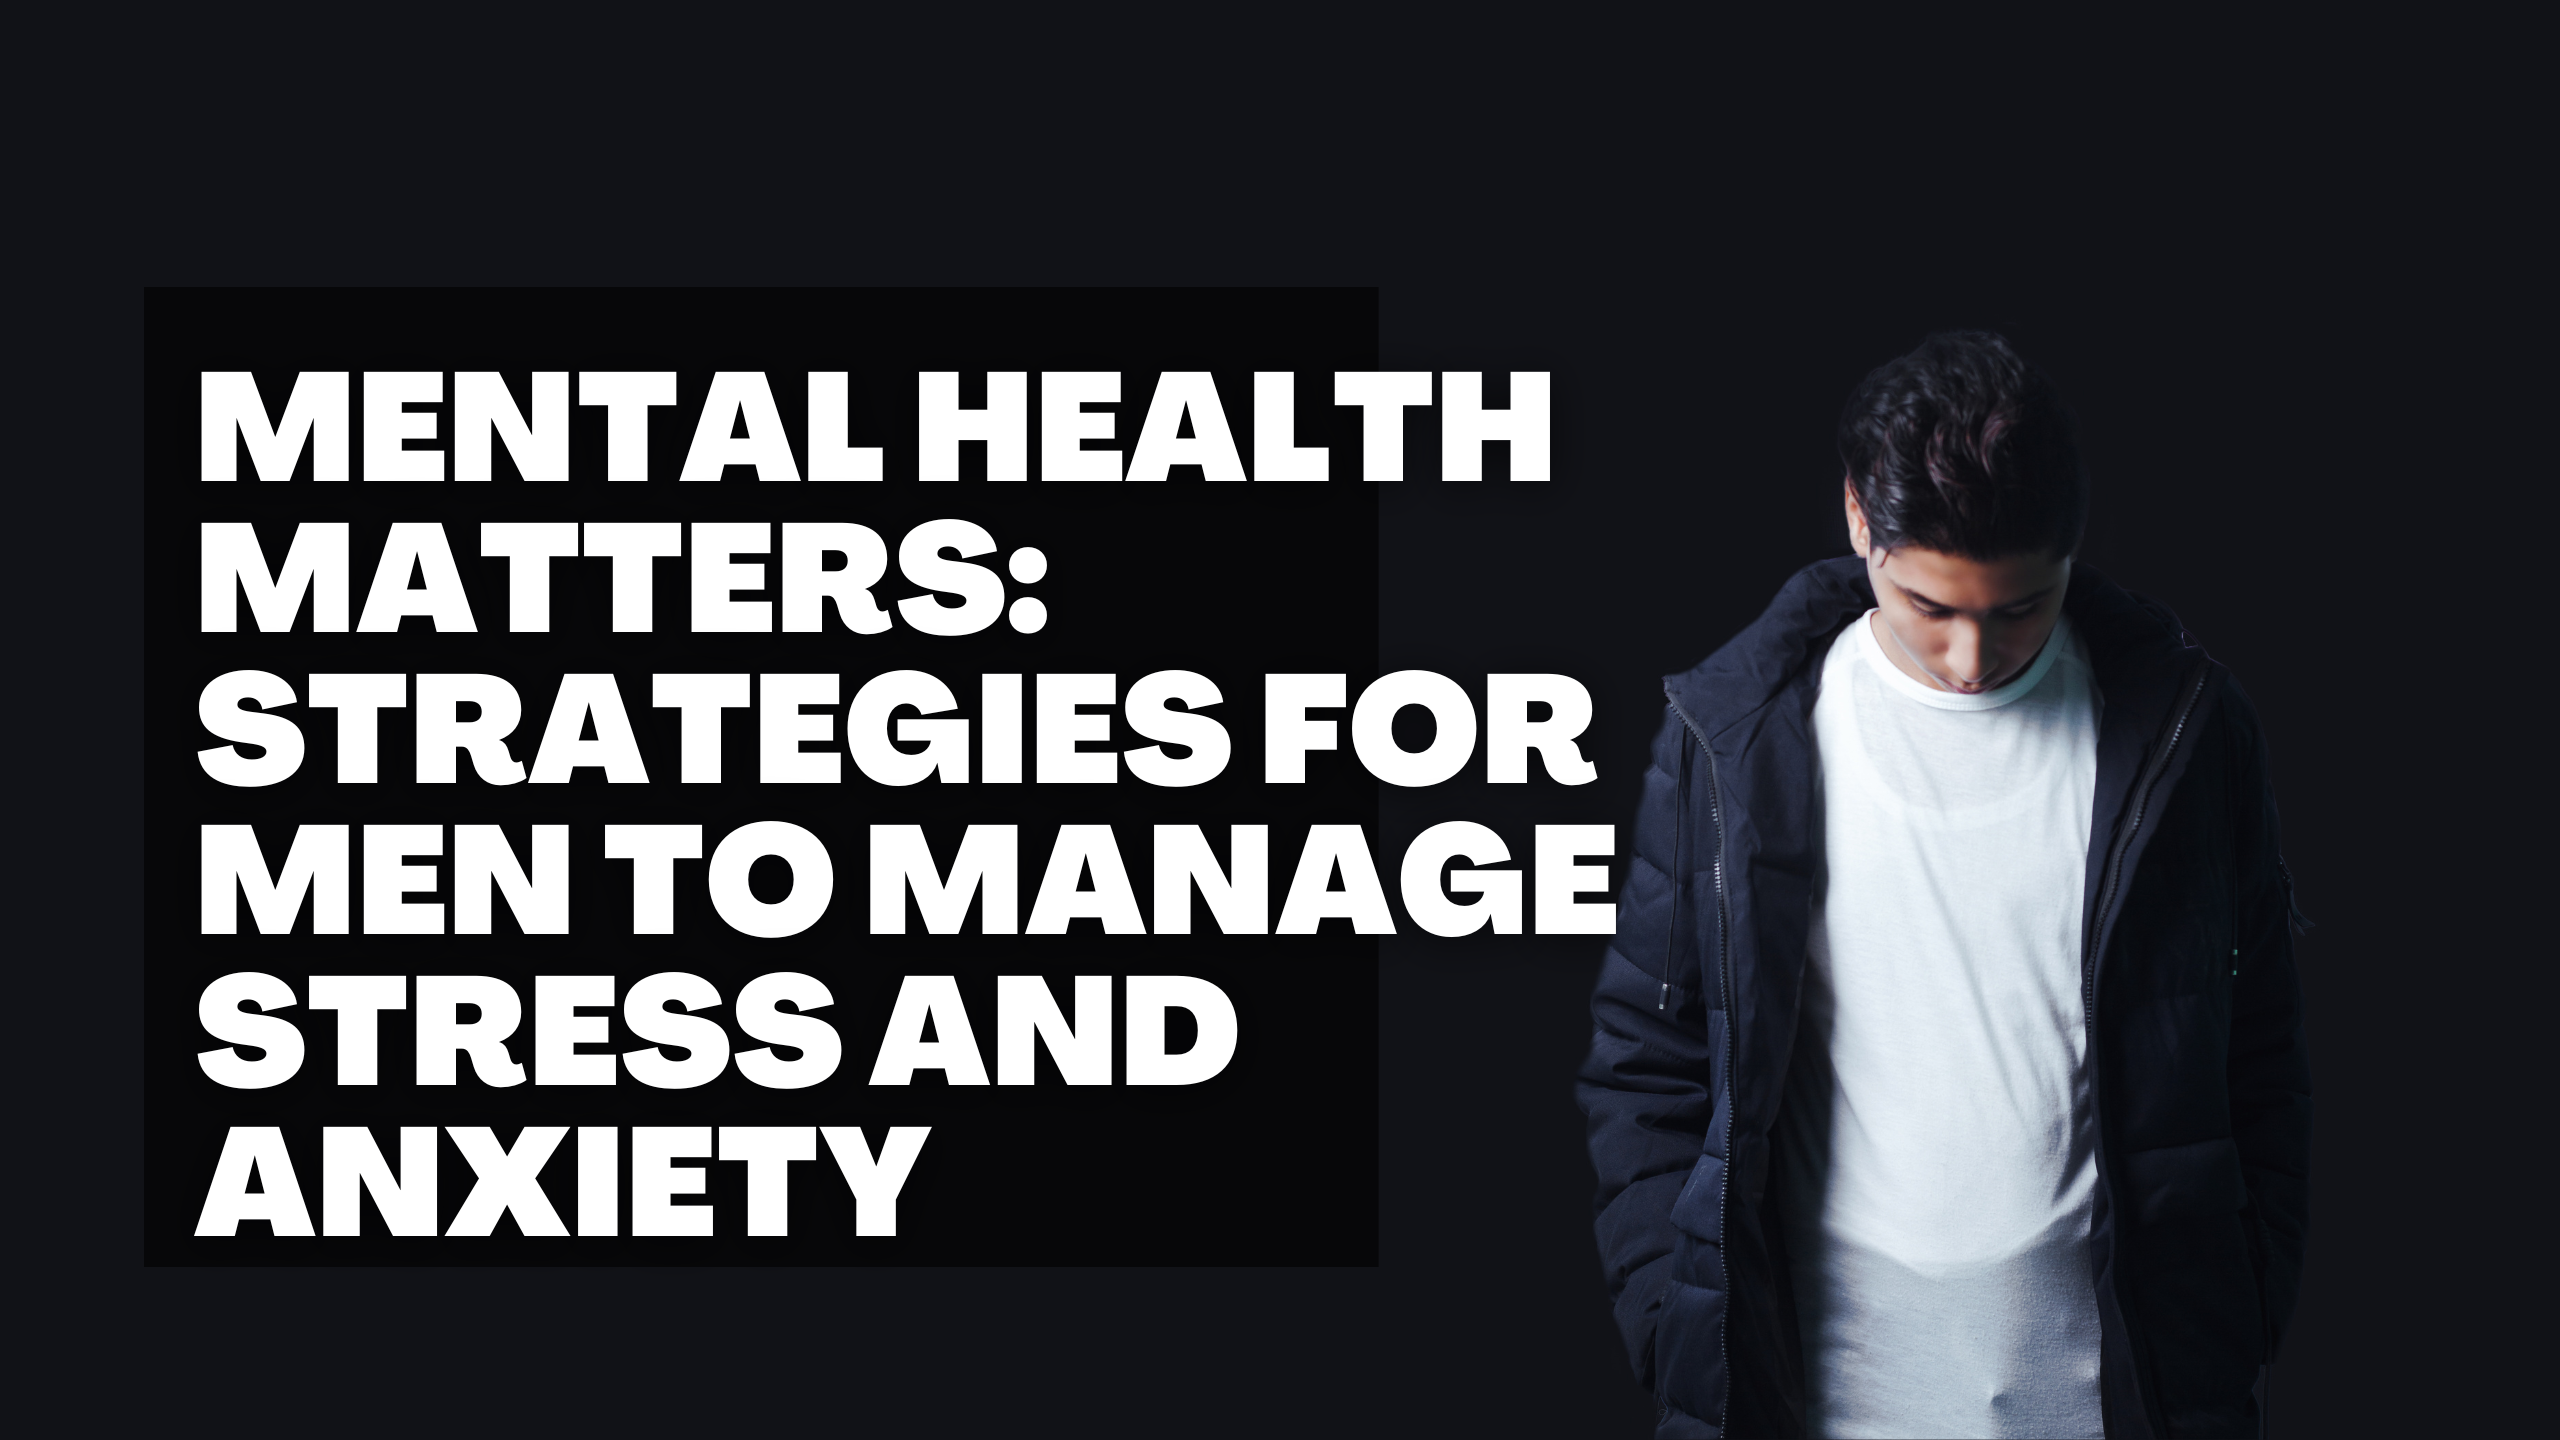 Mental Health Matters: Strategies for Men to Manage Stress and Anxiety